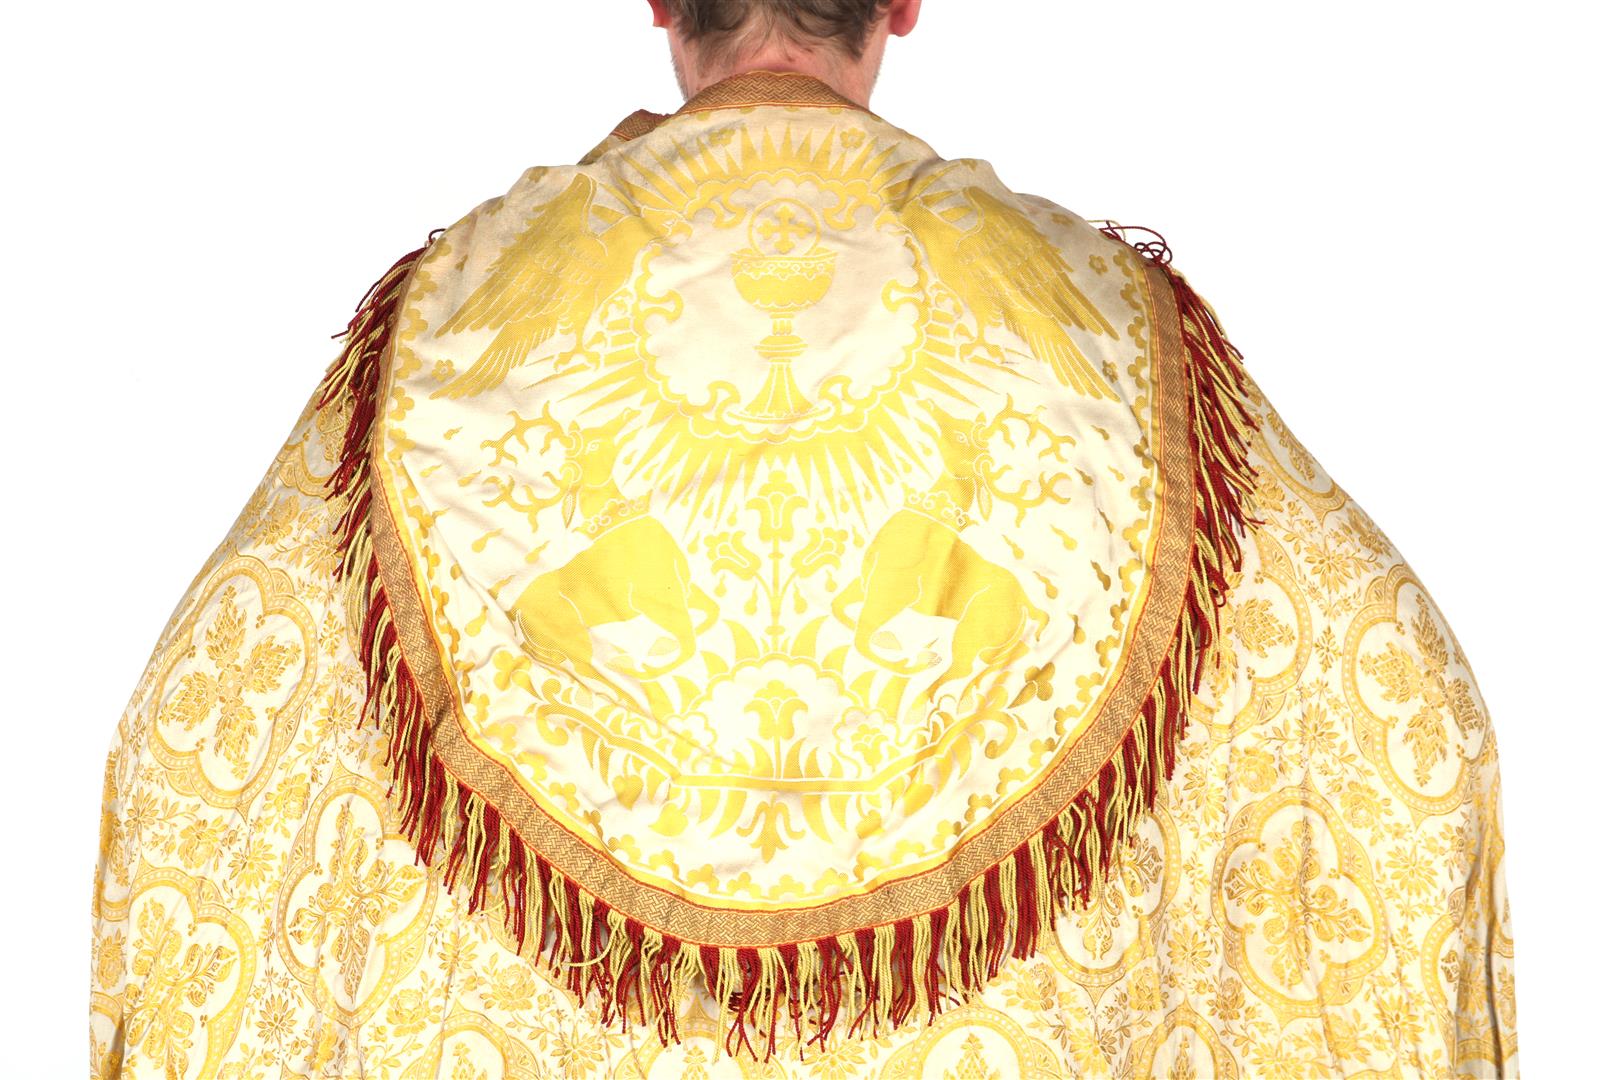 Decorated chasubles - Image 24 of 27